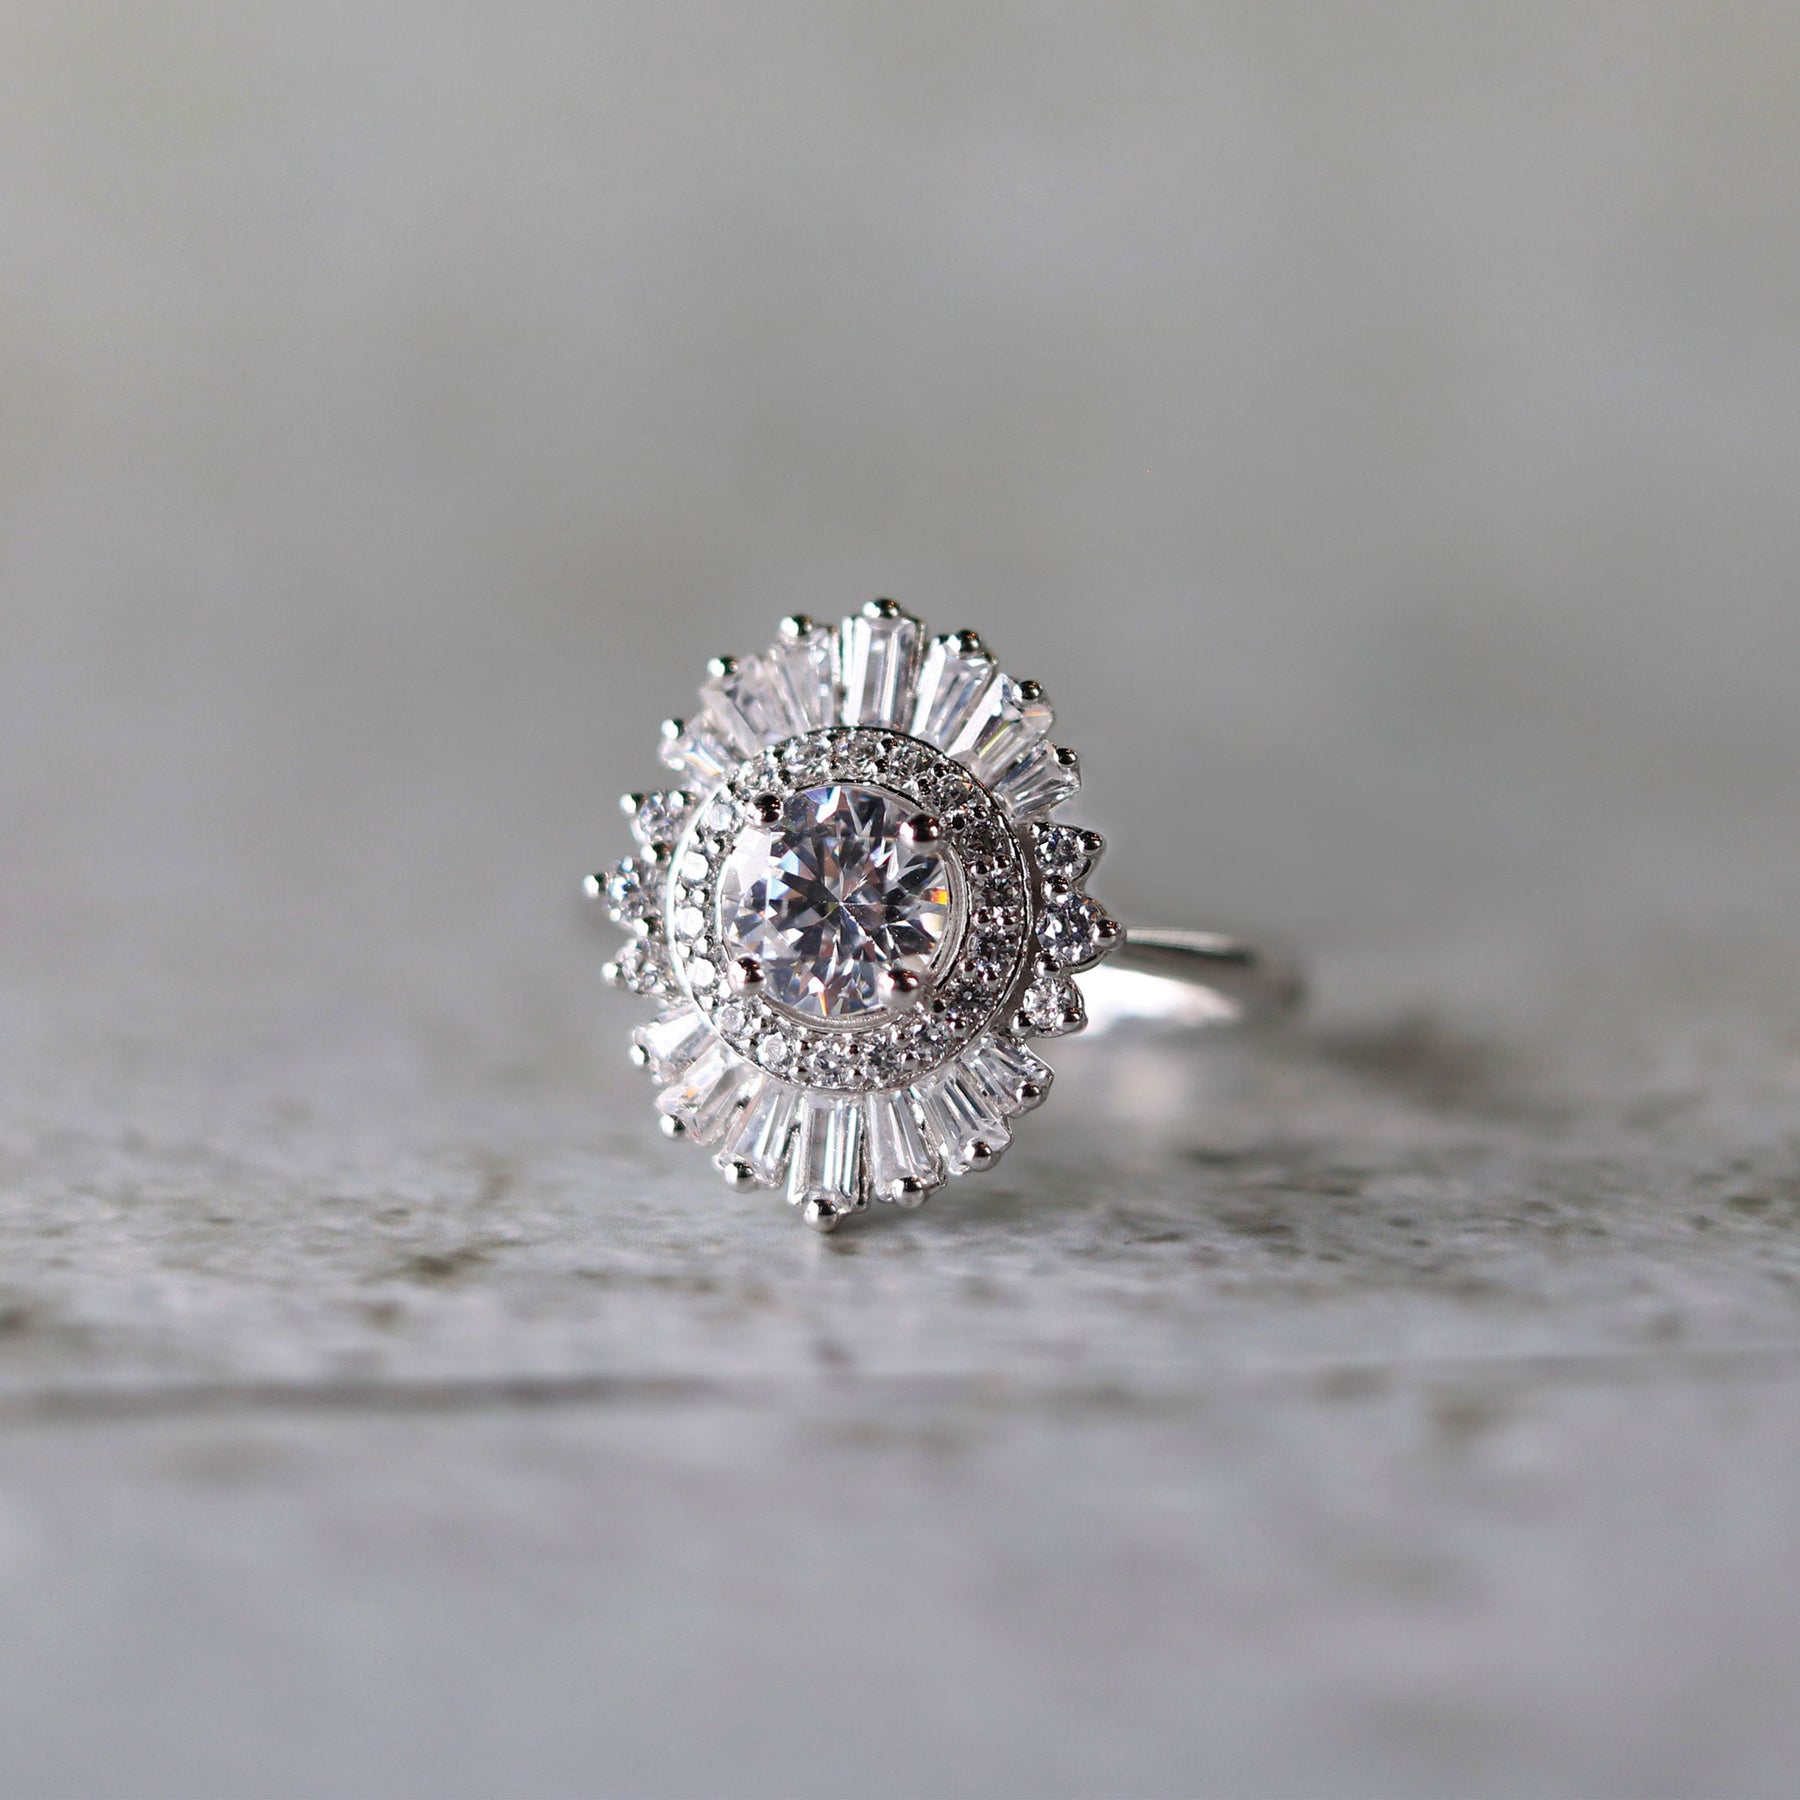 Styles & Significance of Halo Engagement Rings